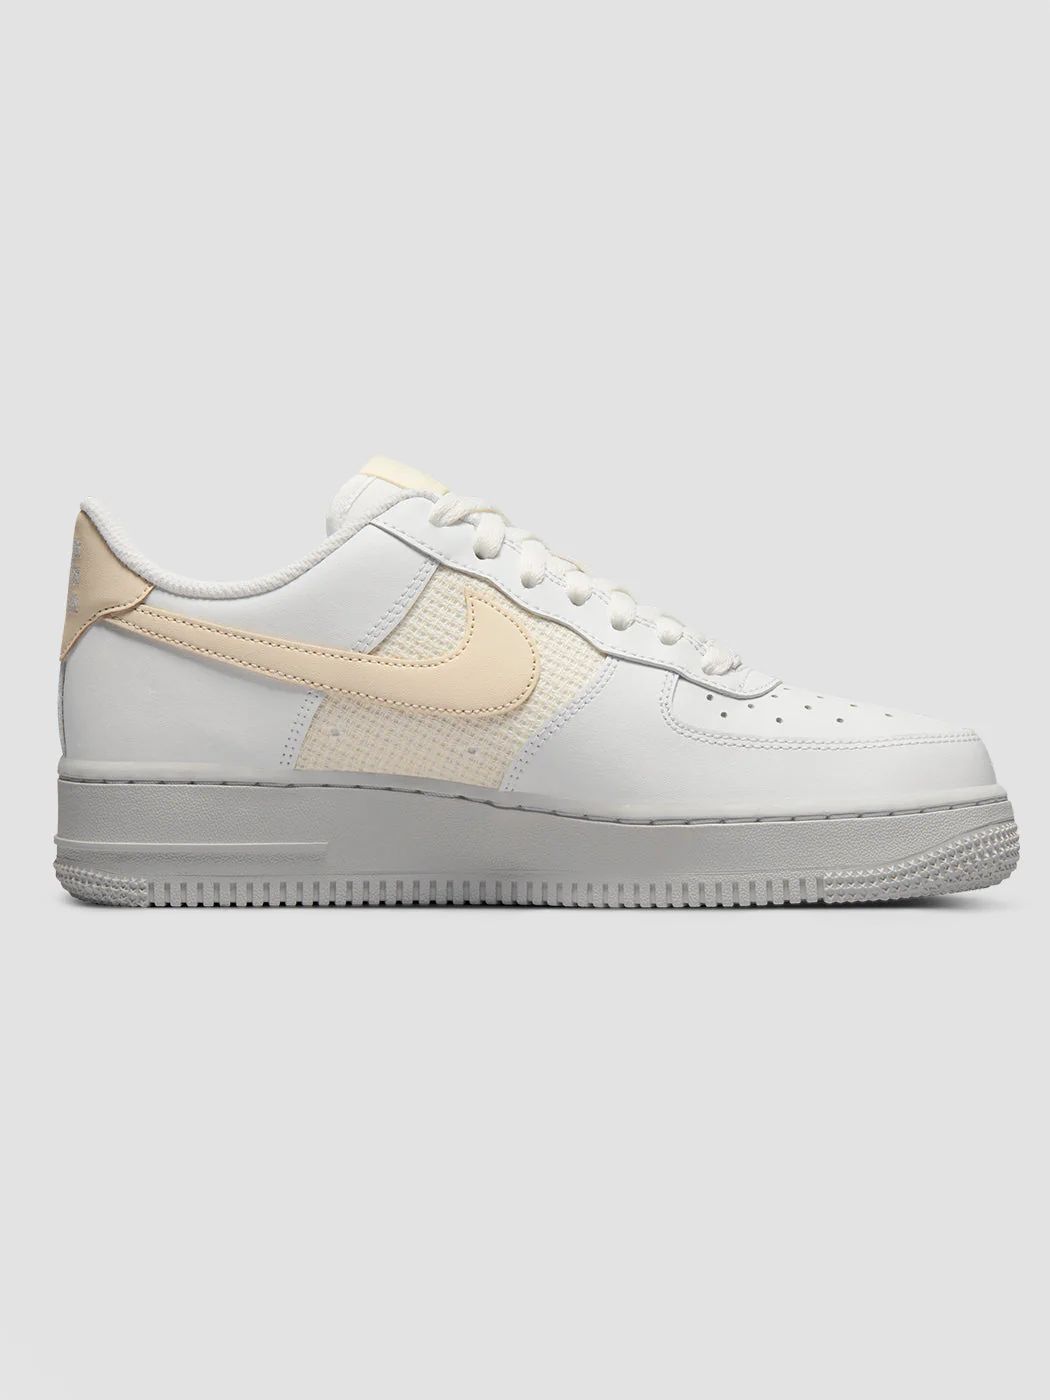 Nike Air Force 1 '07 ESS - Summit White/Fossil-Summit White | Carbon38